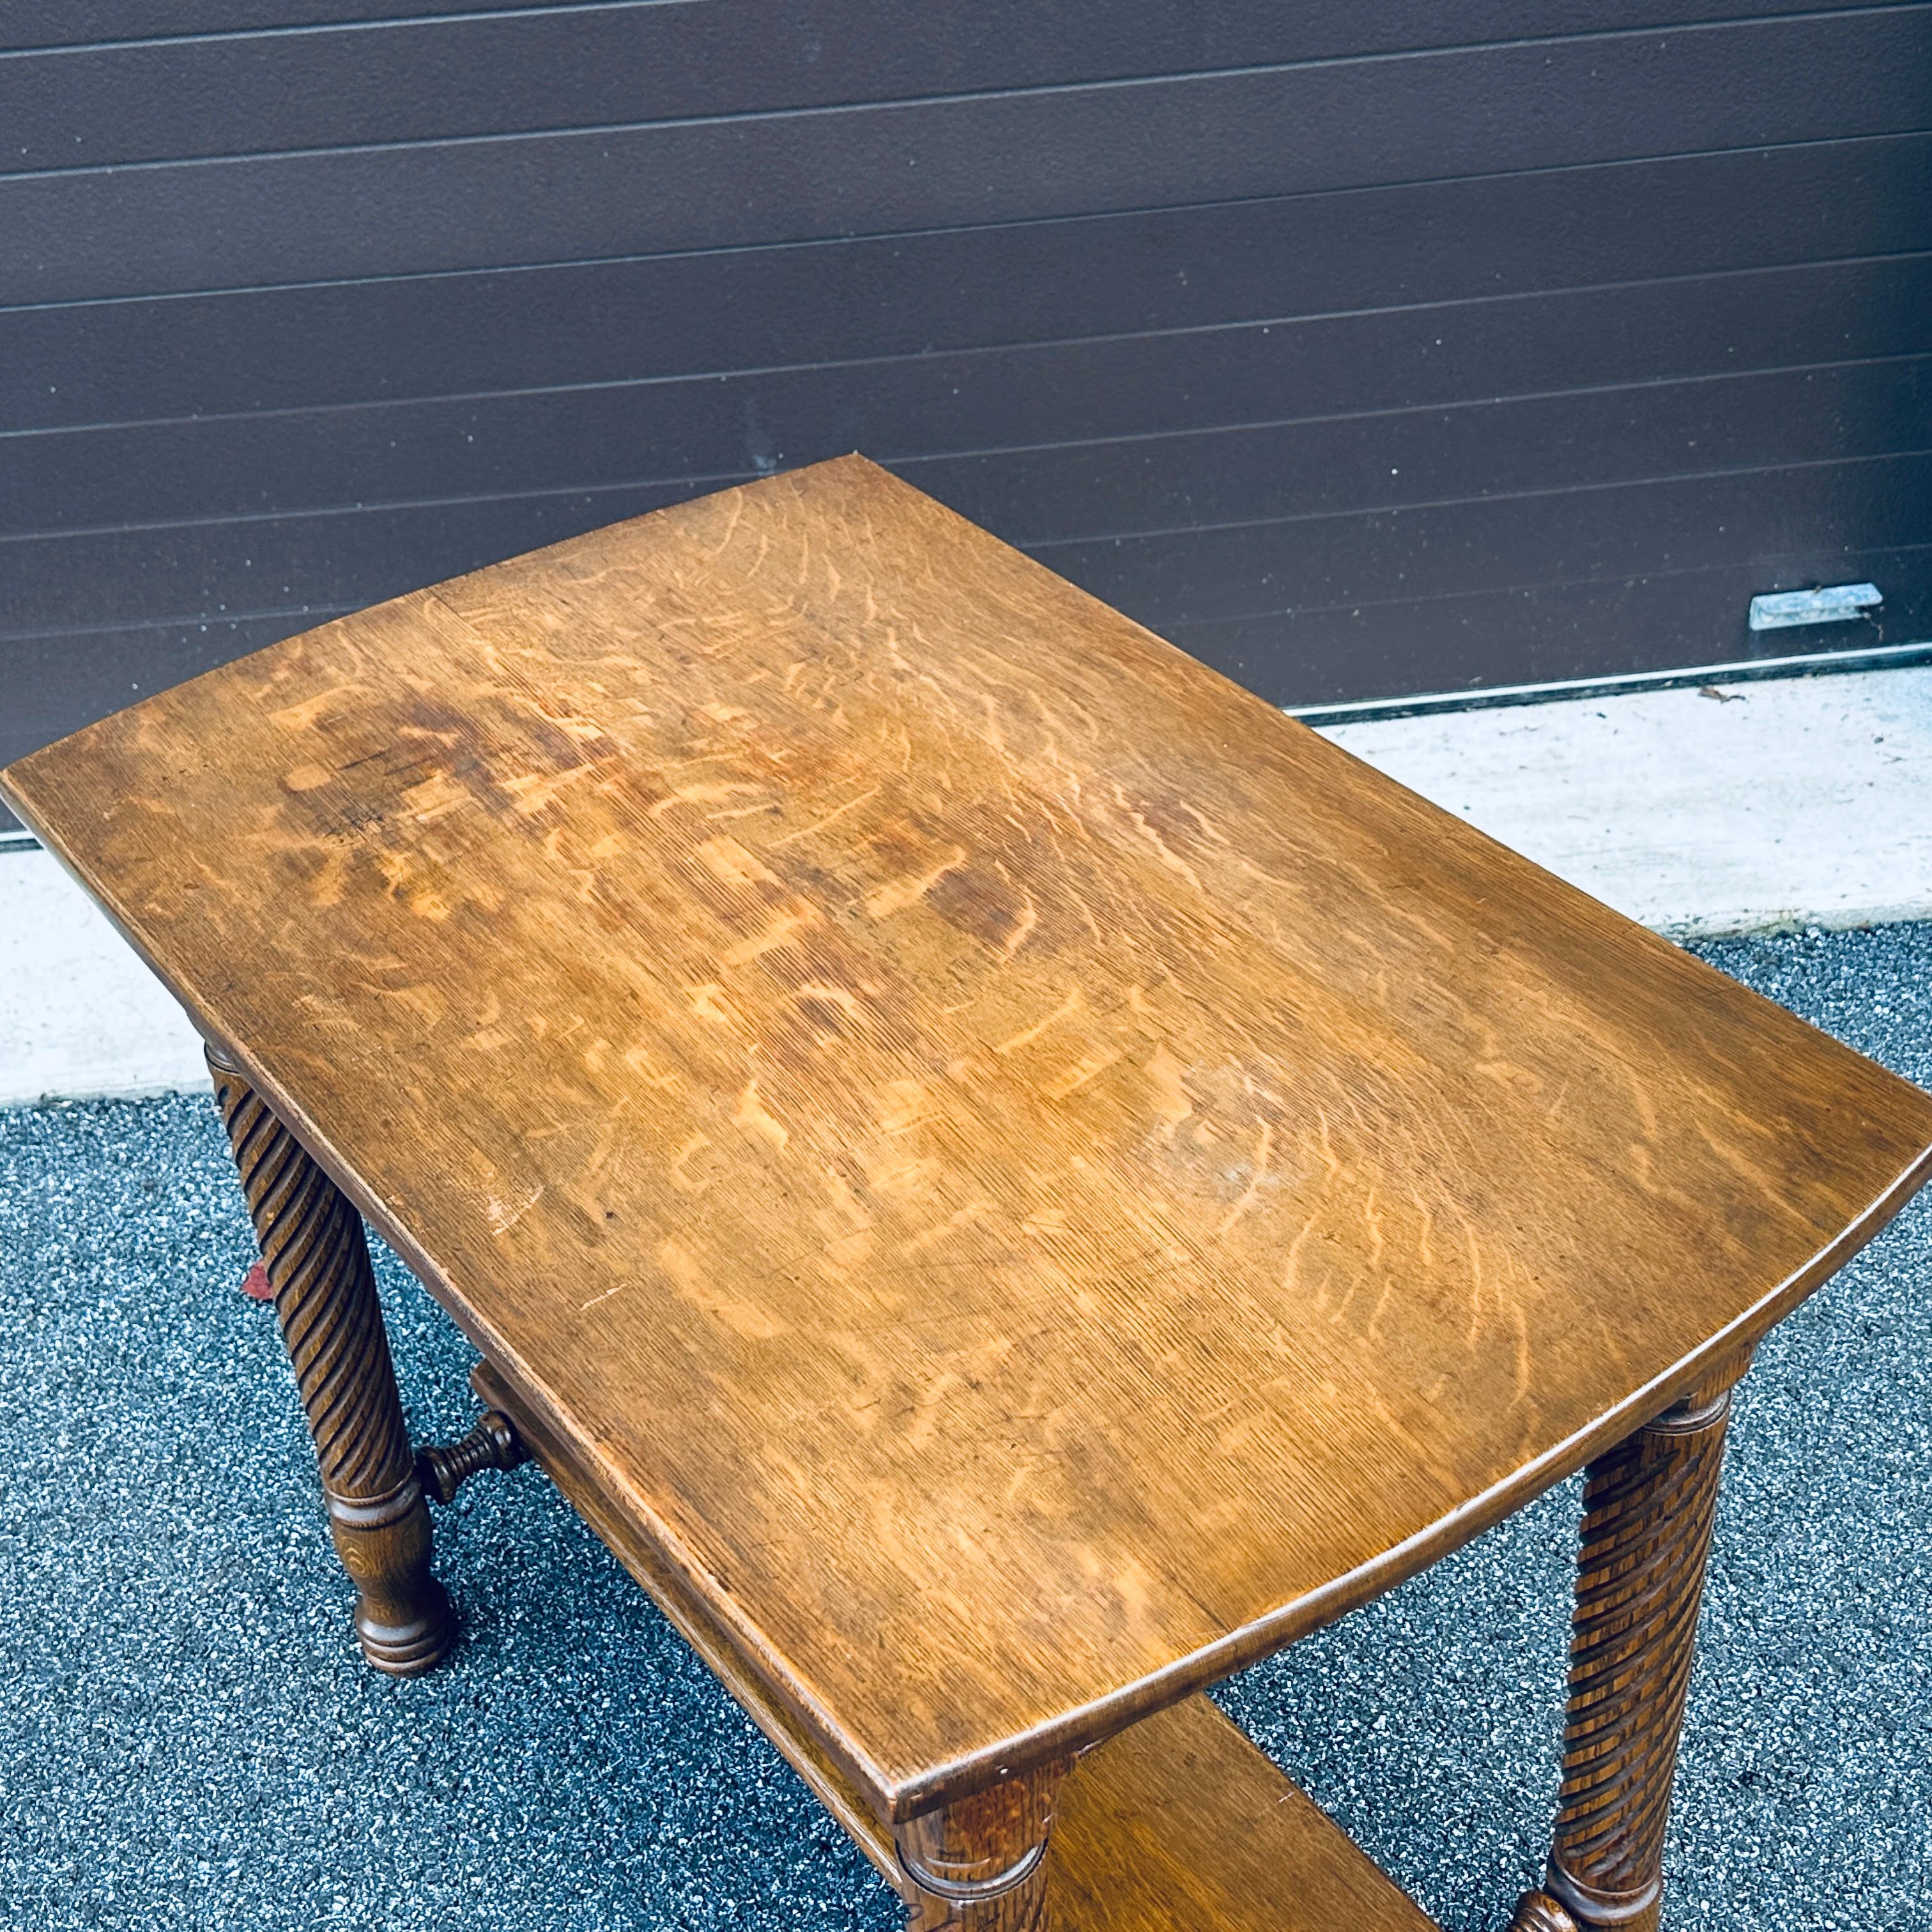 Antique Quartersawn Solid Oak Library Table With Twist Legs & Drawer In Good Condition For Sale In West Chester, PA